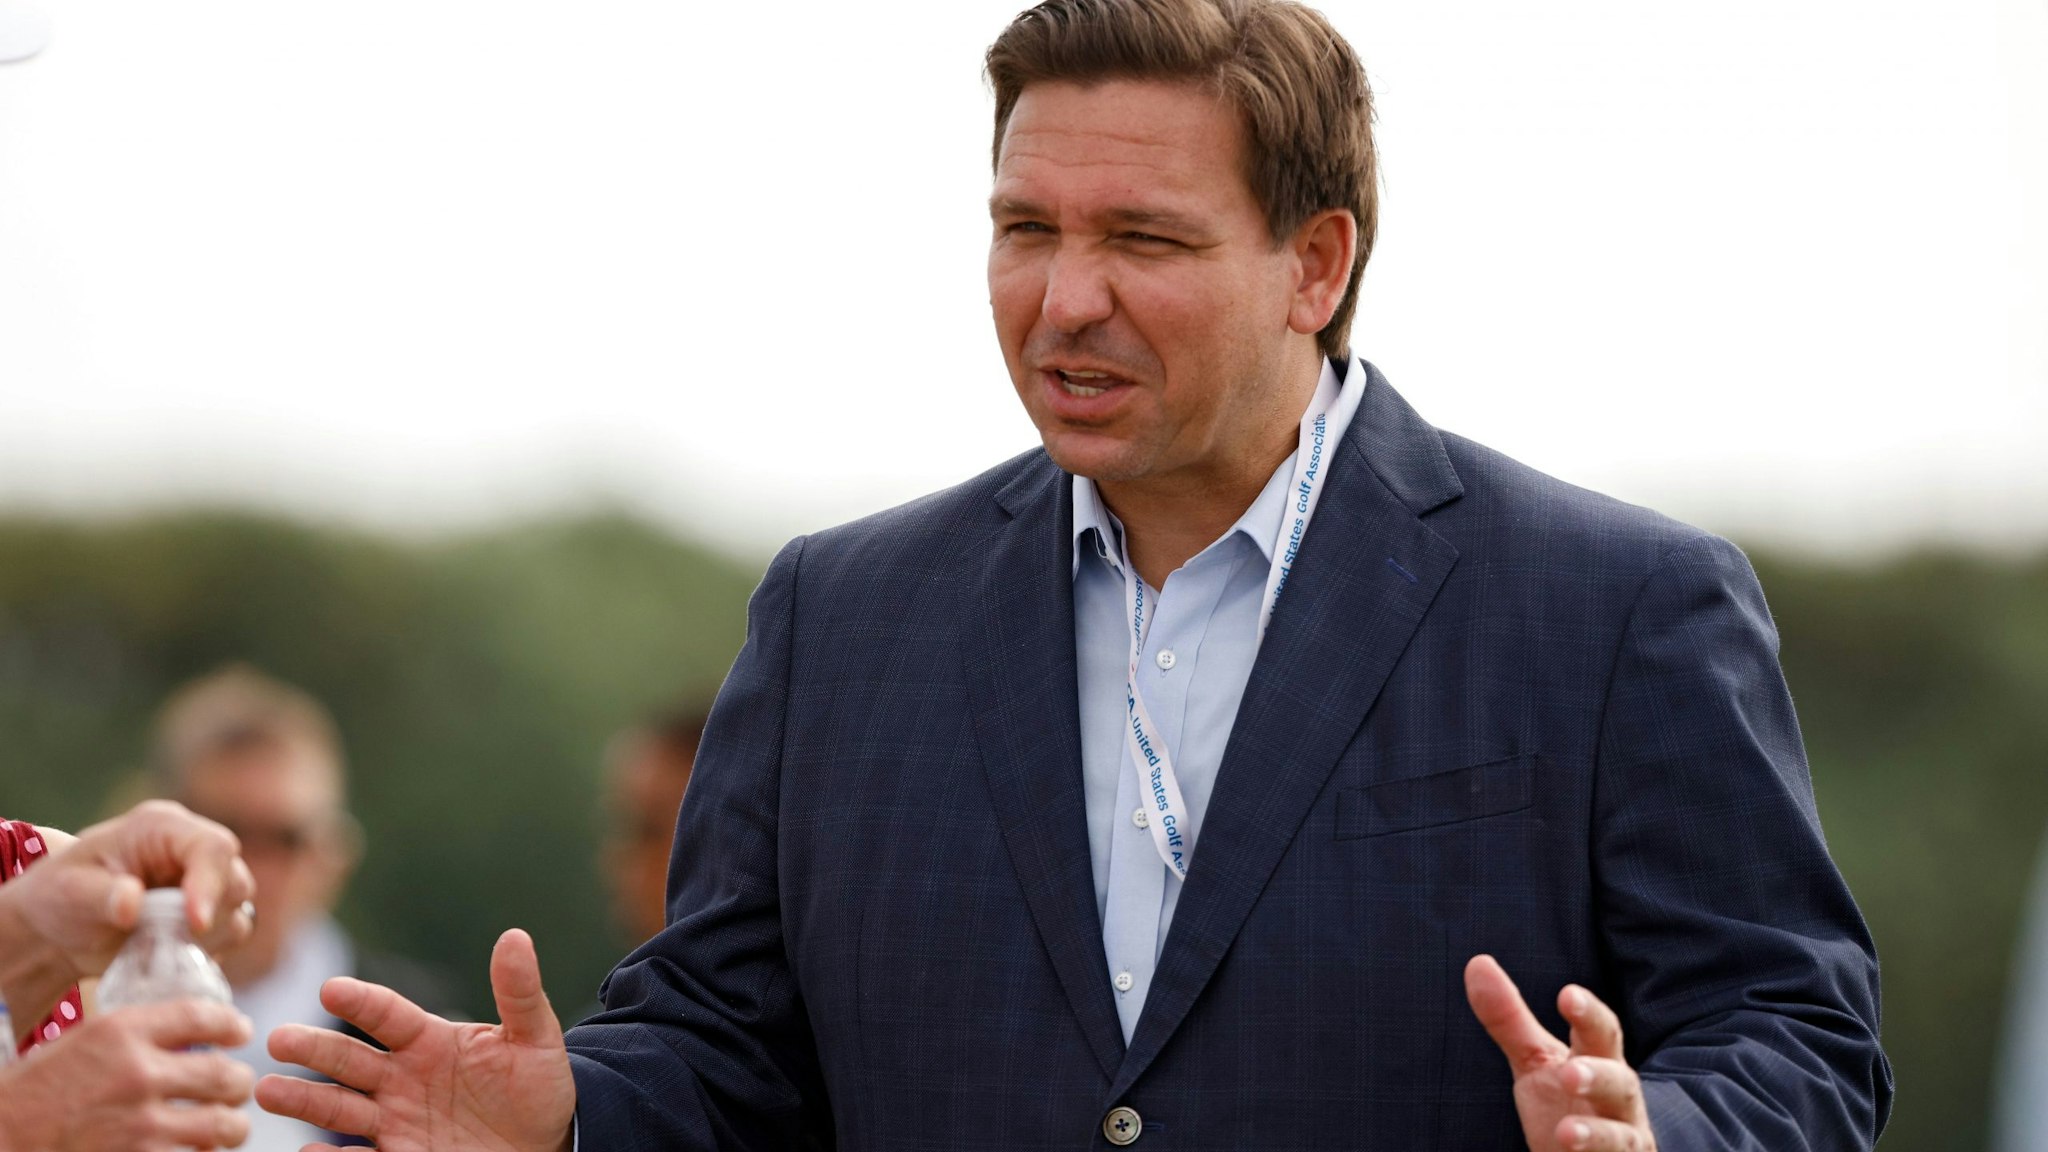 JUNO BEACH, FLORIDA - MAY 08: Florida governor Ron DeSantis meets with fans during Day One of The Walker Cup at Seminole Golf Club on May 08, 2021 in Juno Beach, Florida.